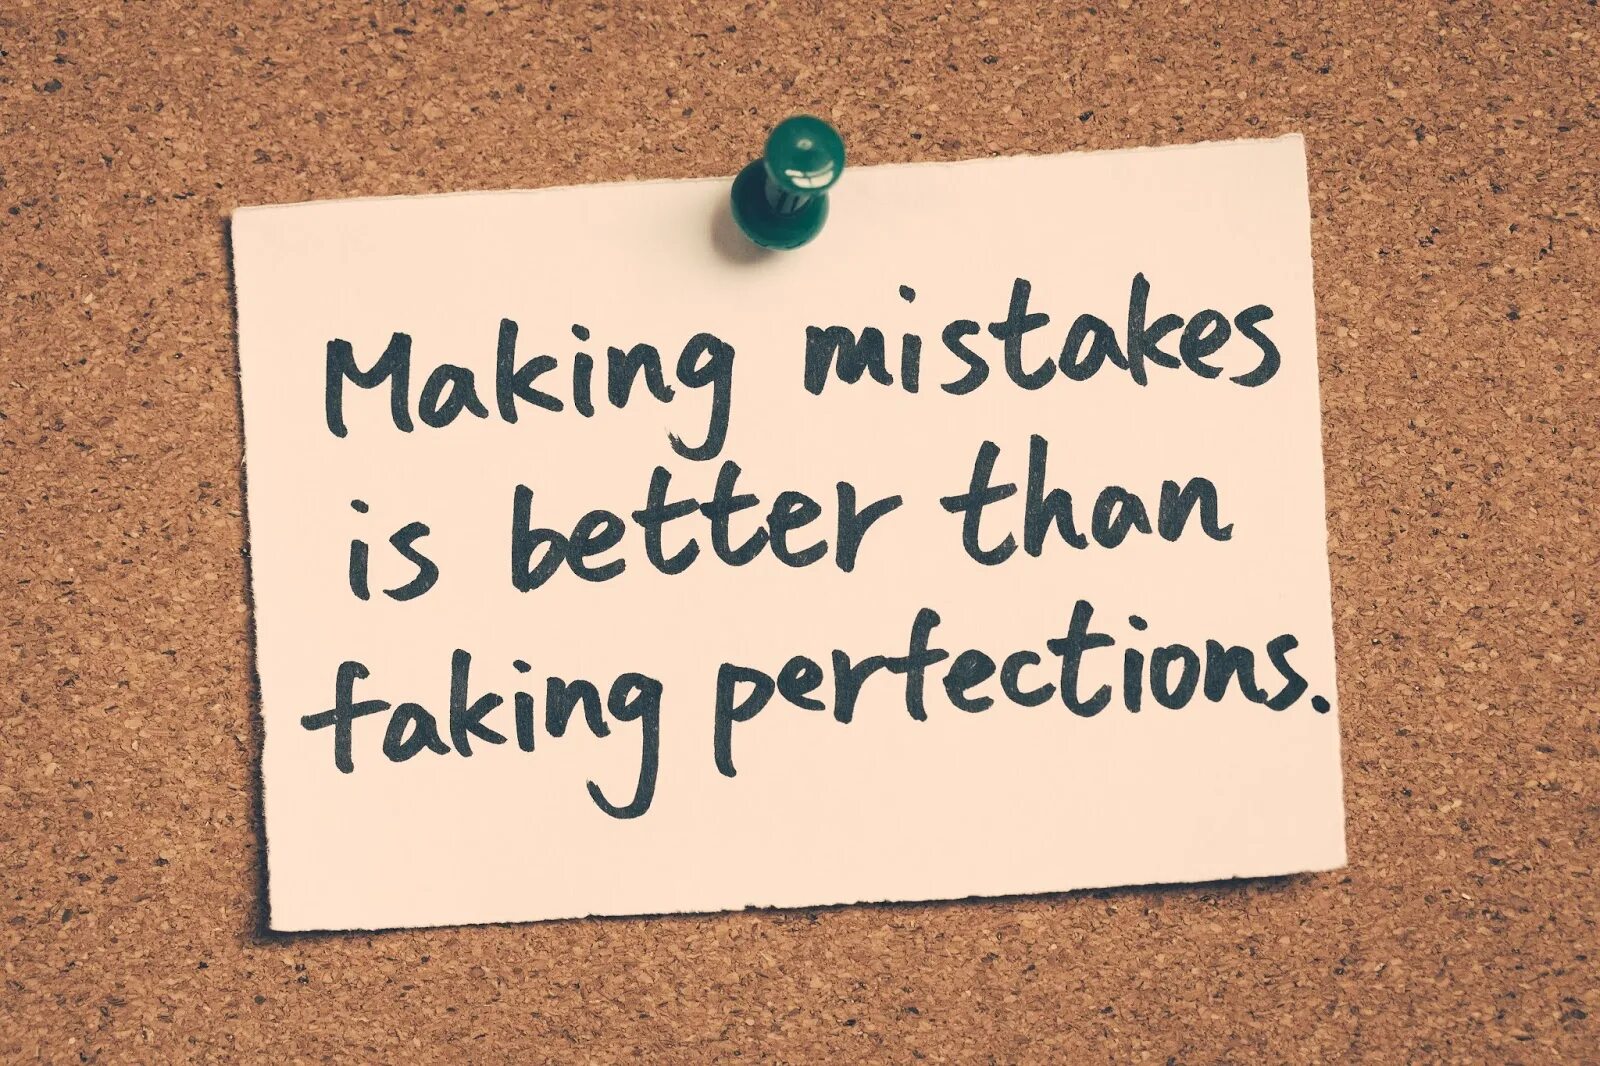 Making mistakes. Making mistakes is better than Faking perfections. Better mistakes. Learn from your mistakes. Make mistake good